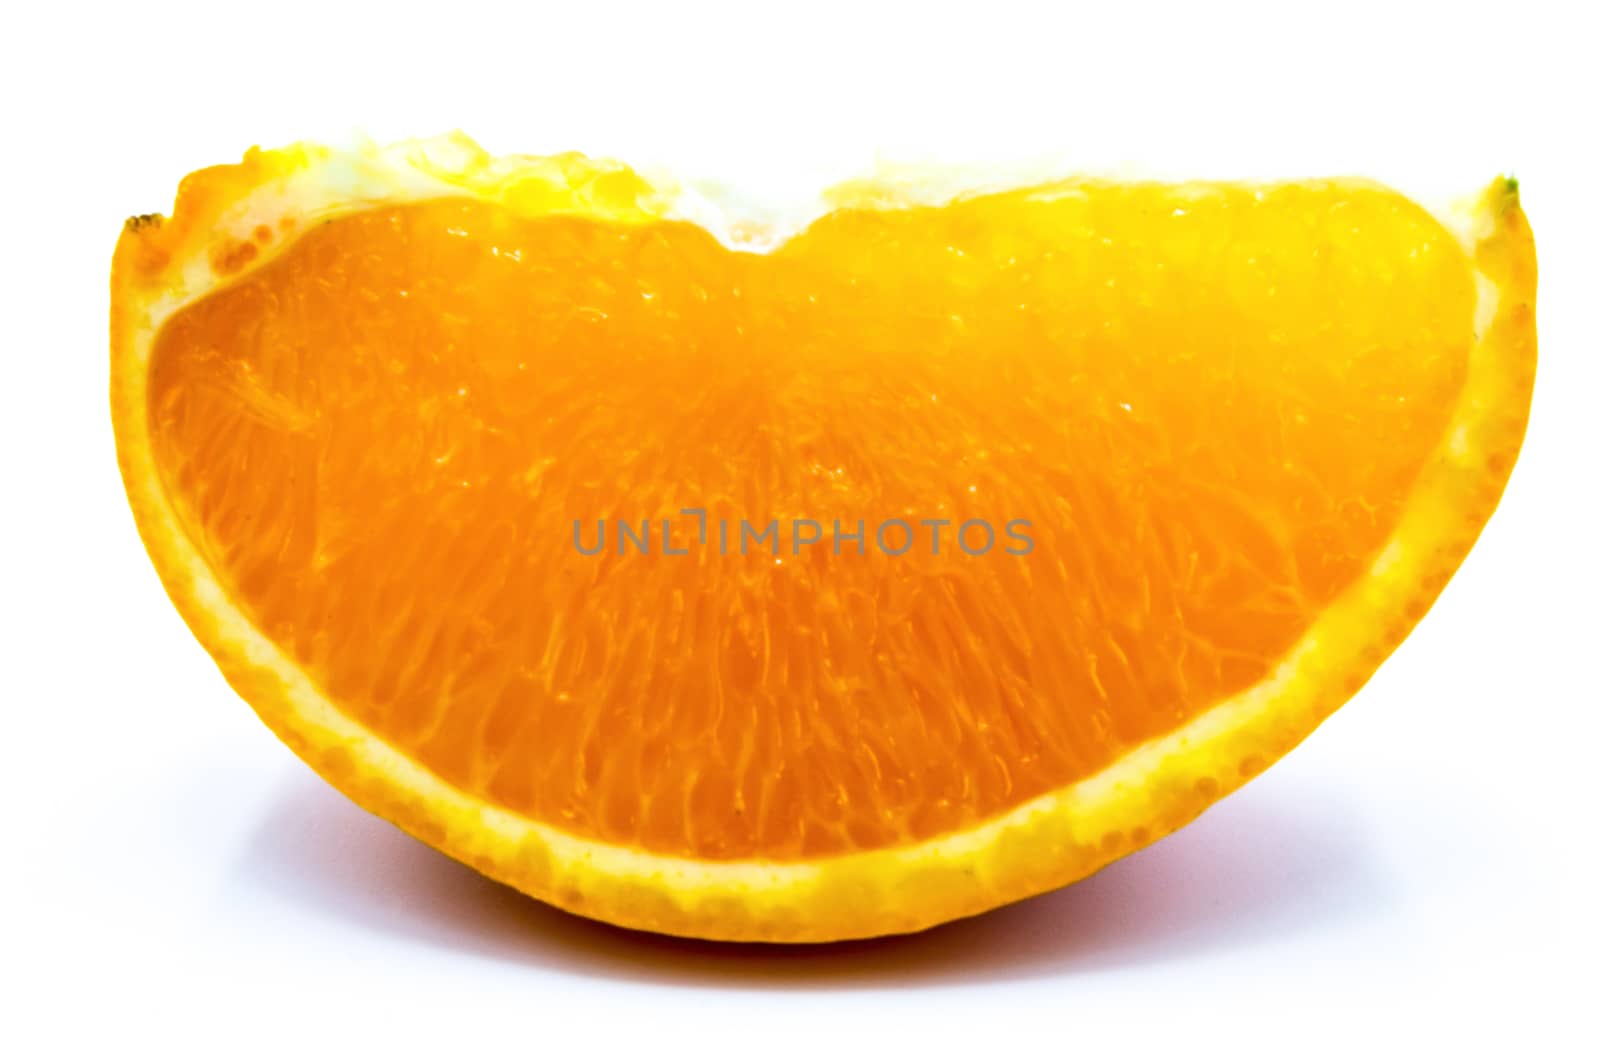 Close-up of an orange wedge  by Philou1000